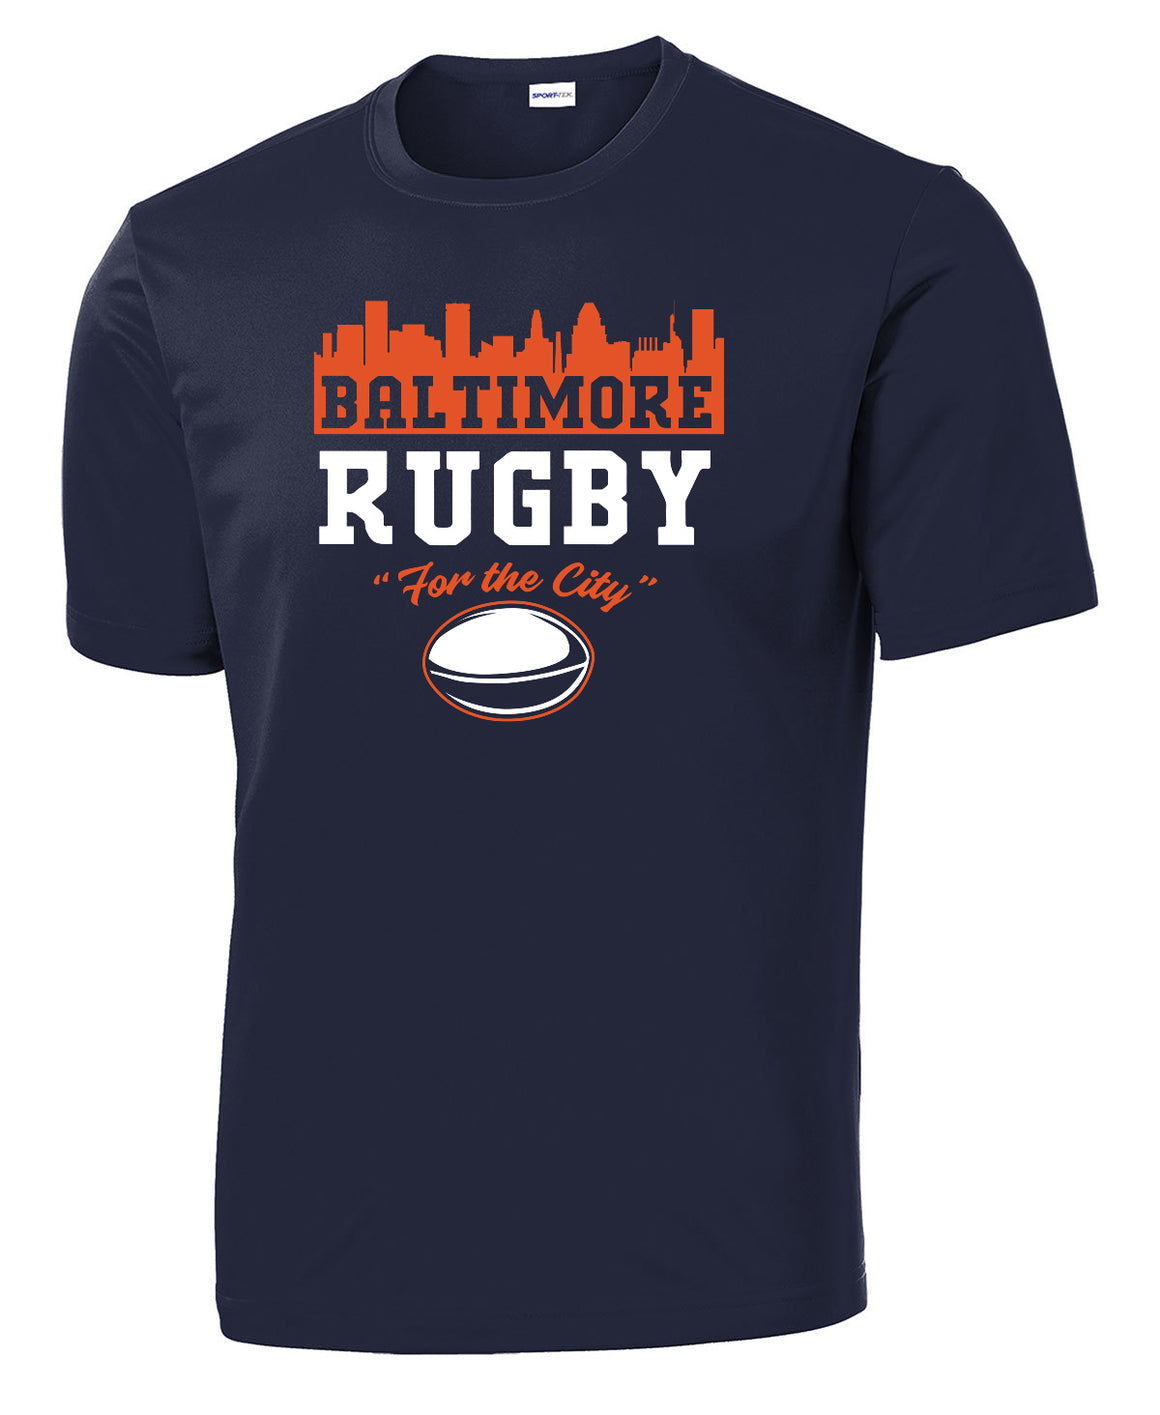 Baltimore Rugby T- Shirt - Navy